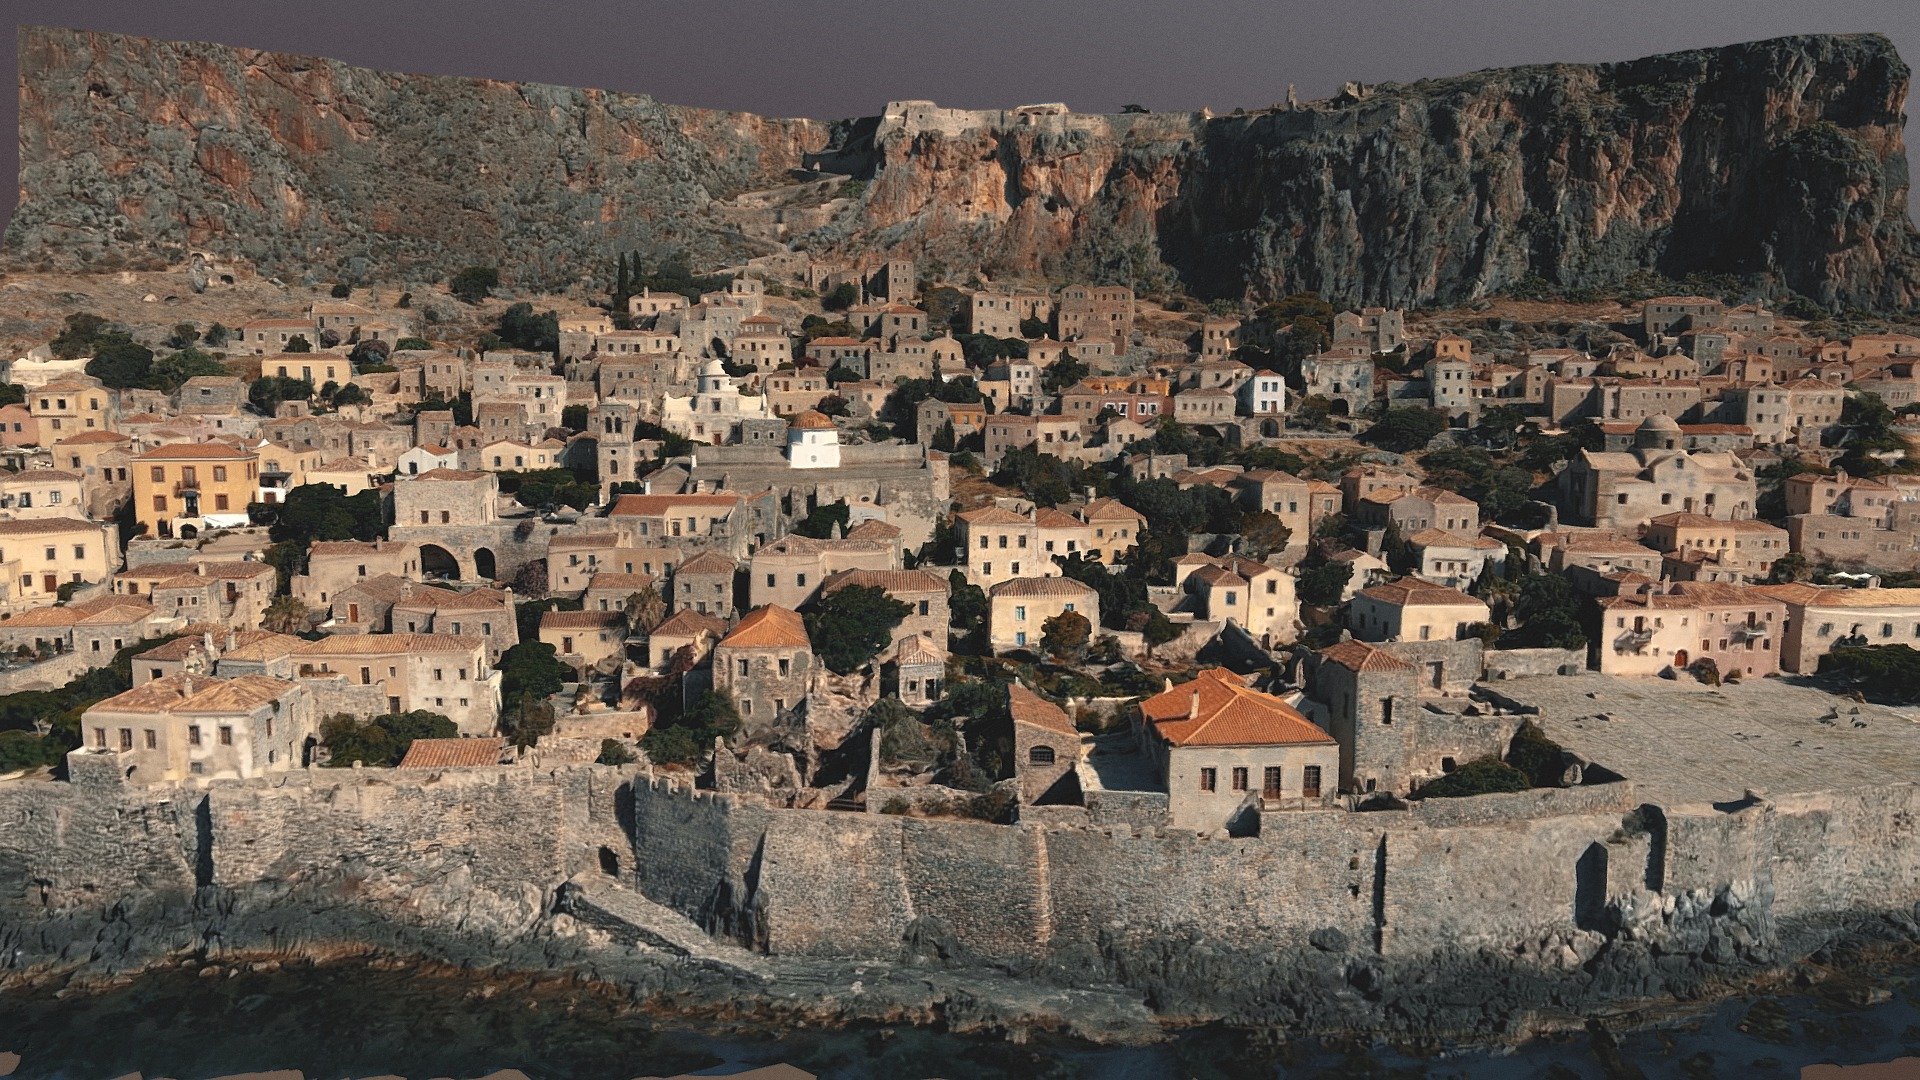 *Monemvasia (Greek: Μονεμβασιά, Μονεμβασία, or Μονεμβάσια) is a town and municipality in Laconia, Greece. The town is located on a small island off the east coast of the Peloponnese, surrounded by the Myrtoan Sea. The island is connected to the mainland by a short causeway 200 metres (660 ft) in length. Its area consists mostly of a large plateau some 100 m (330 ft) above sea level, up to 300 m (980 ft) wide and 1 kilometre (0.62 mi) long. Founded in the sixth century, and thus one of the oldest continually-inhabited fortified towns in Europe, the town is the site of a once-powerful medieval fortress, and was at one point one of the most important commercial centres in the Eastern Mediterranean. The town's walls and many Byzantine churches remain as testaments to the town's history. * [wiki] 
Historical Mediterranean Sea Greece Greek Italian town village countryside scene background

Experimental, reconstructed from various 4K drone footage only - Monemvasia town scene - Download Free 3D model by FUD-UJEP 3d model